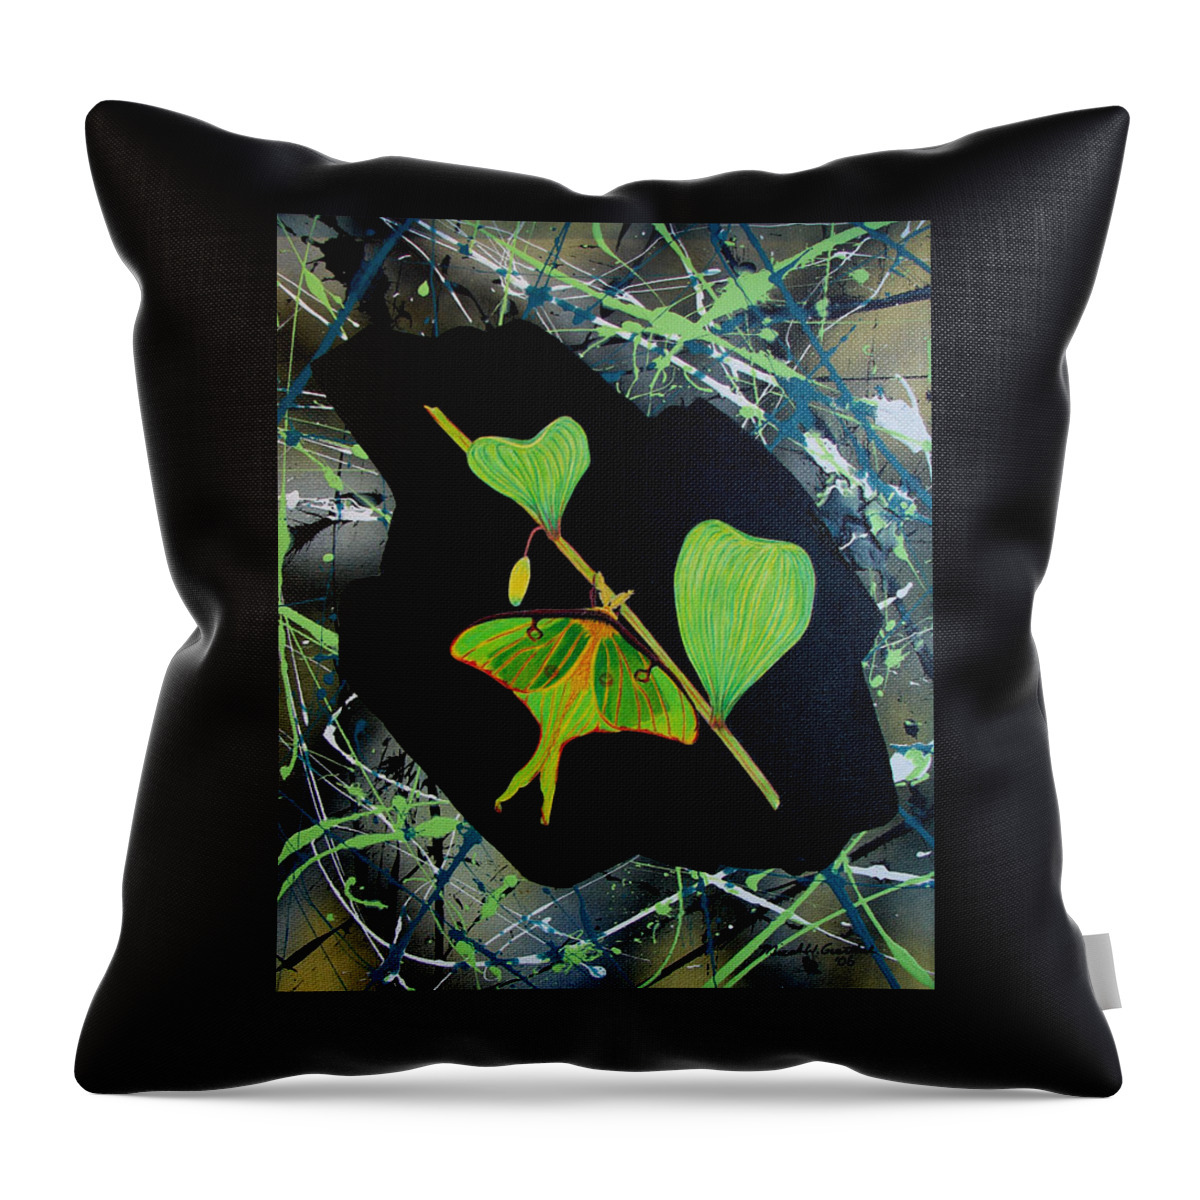 Abstract Throw Pillow featuring the painting Imperfect III by Micah Guenther